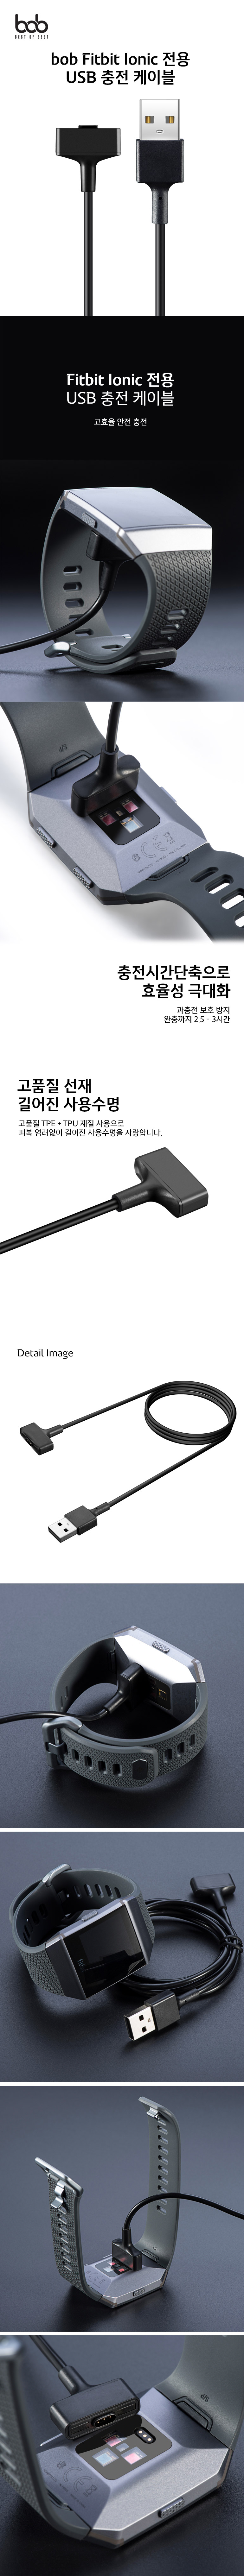 bob_fitbit_ionic_charge_cable.jpg